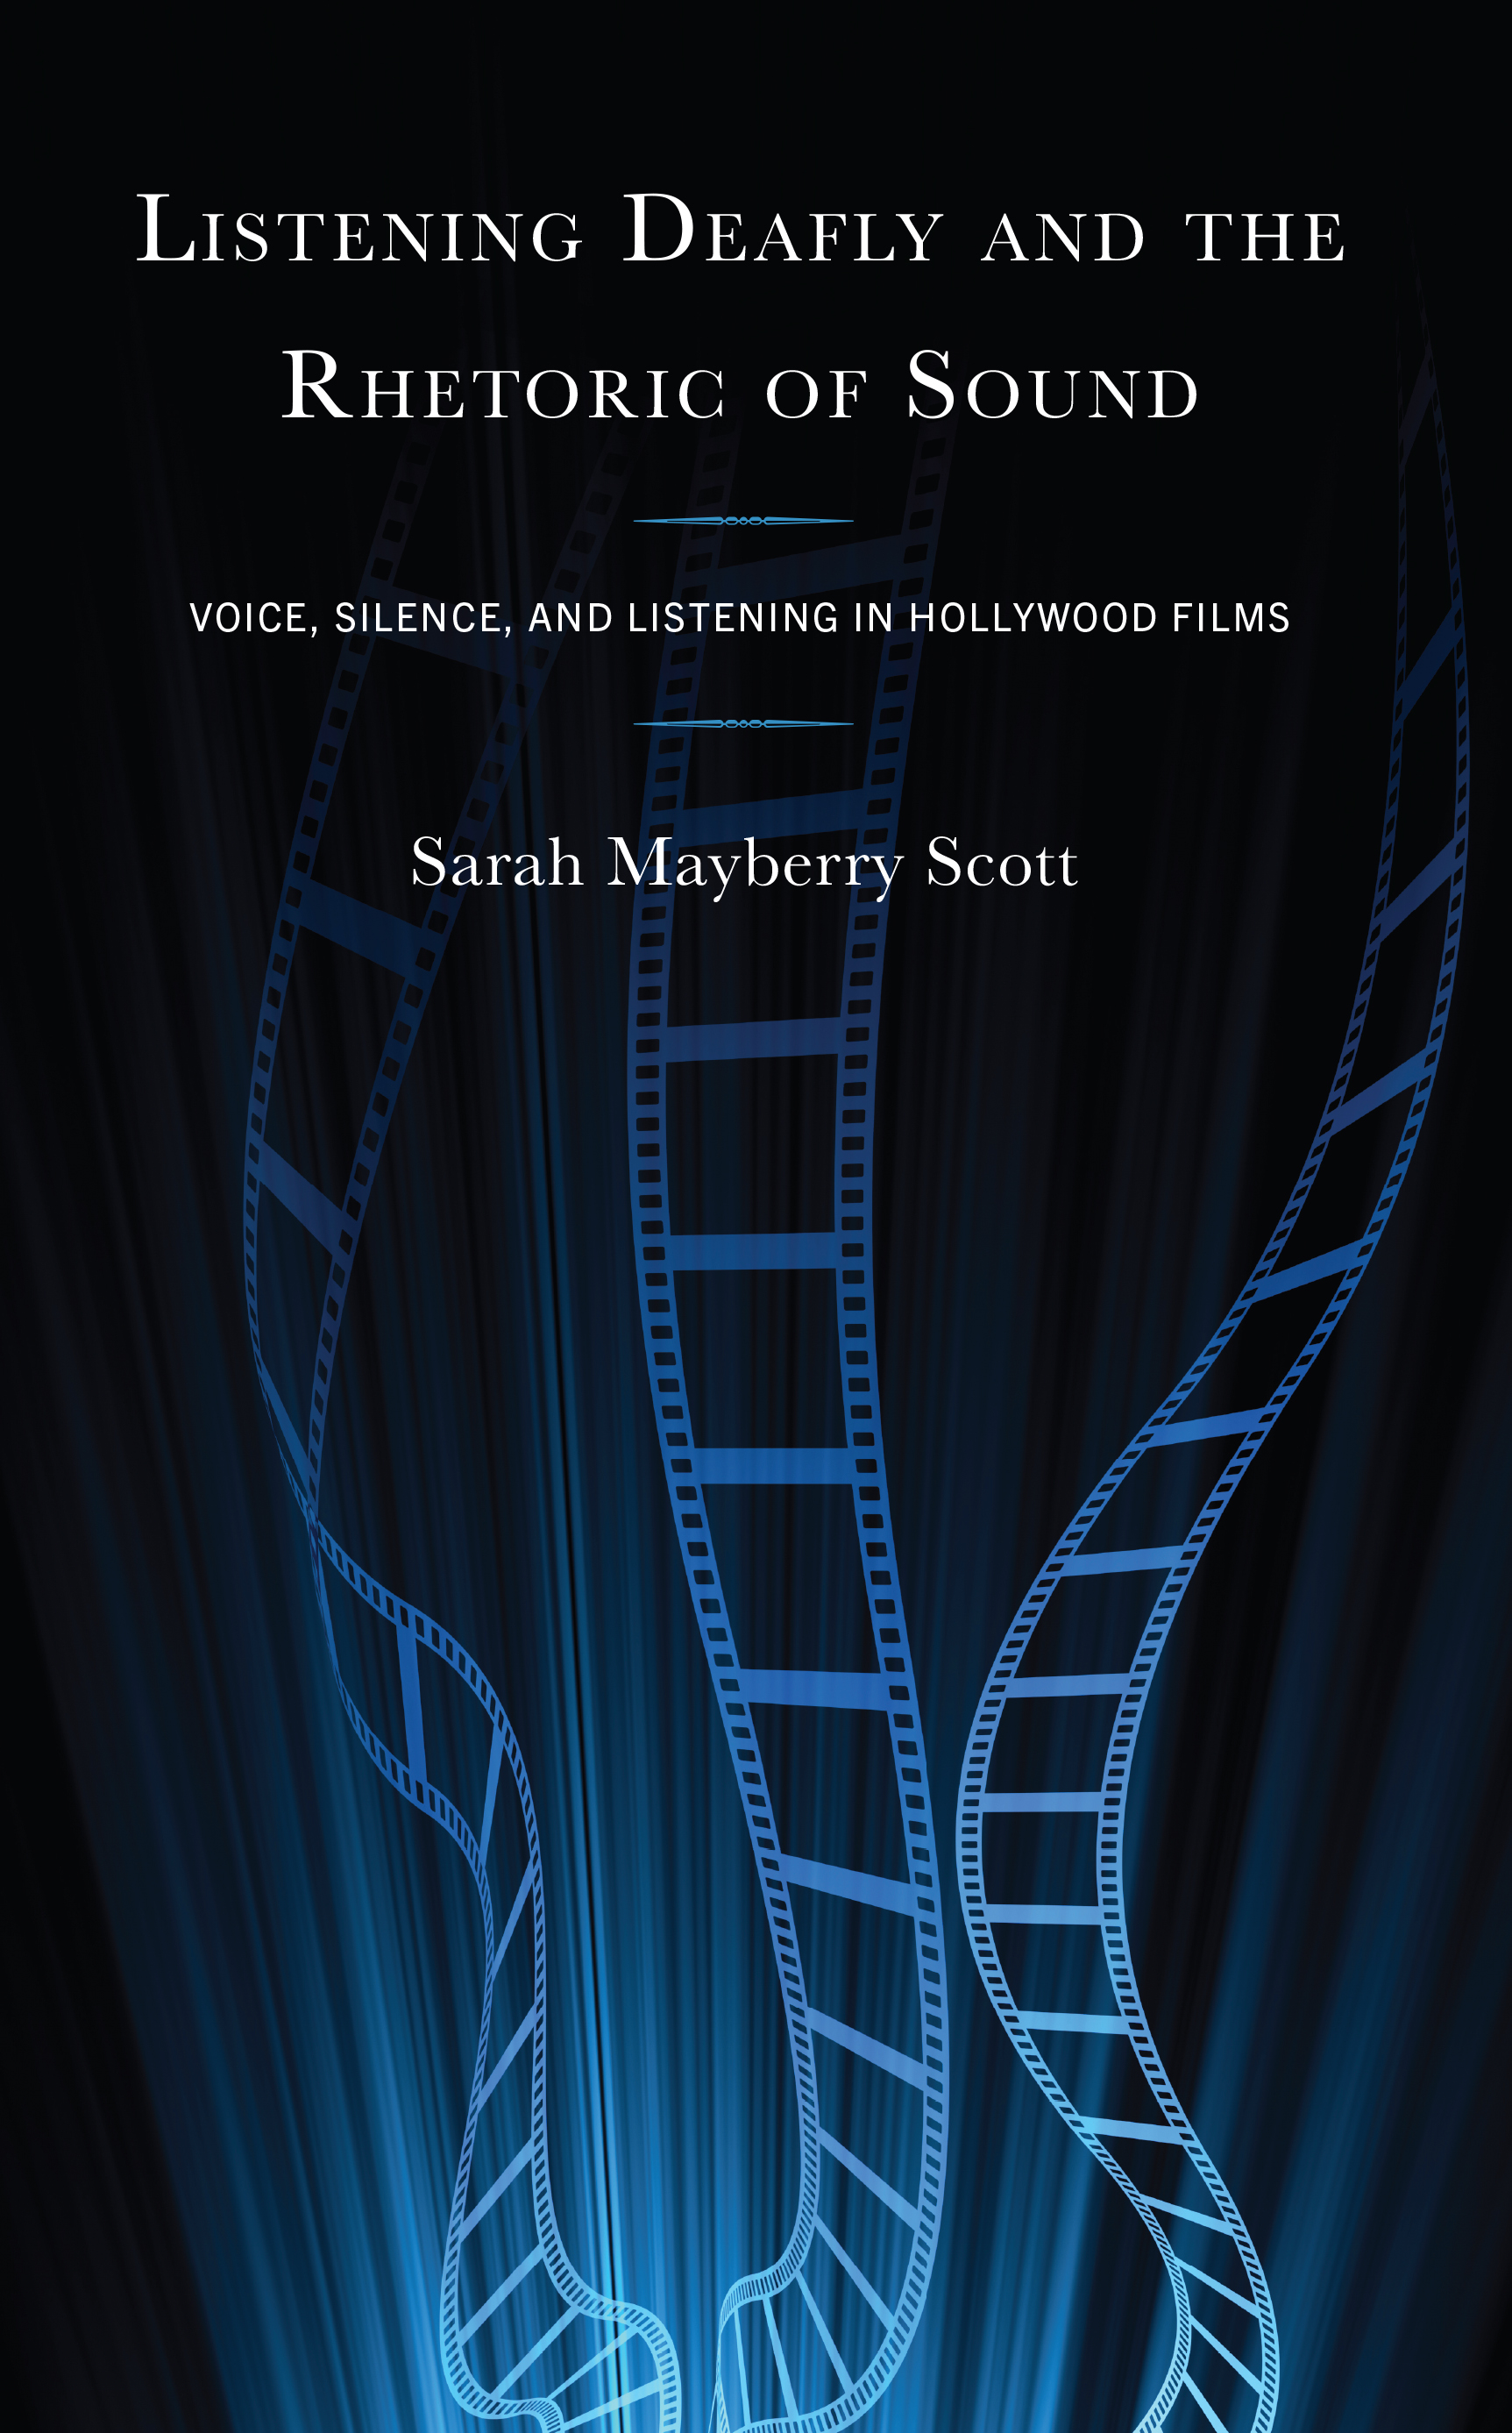 Listening Deafly and the Rhetoric of Sound: Voice, Silence, and Listening in Hollywood Films